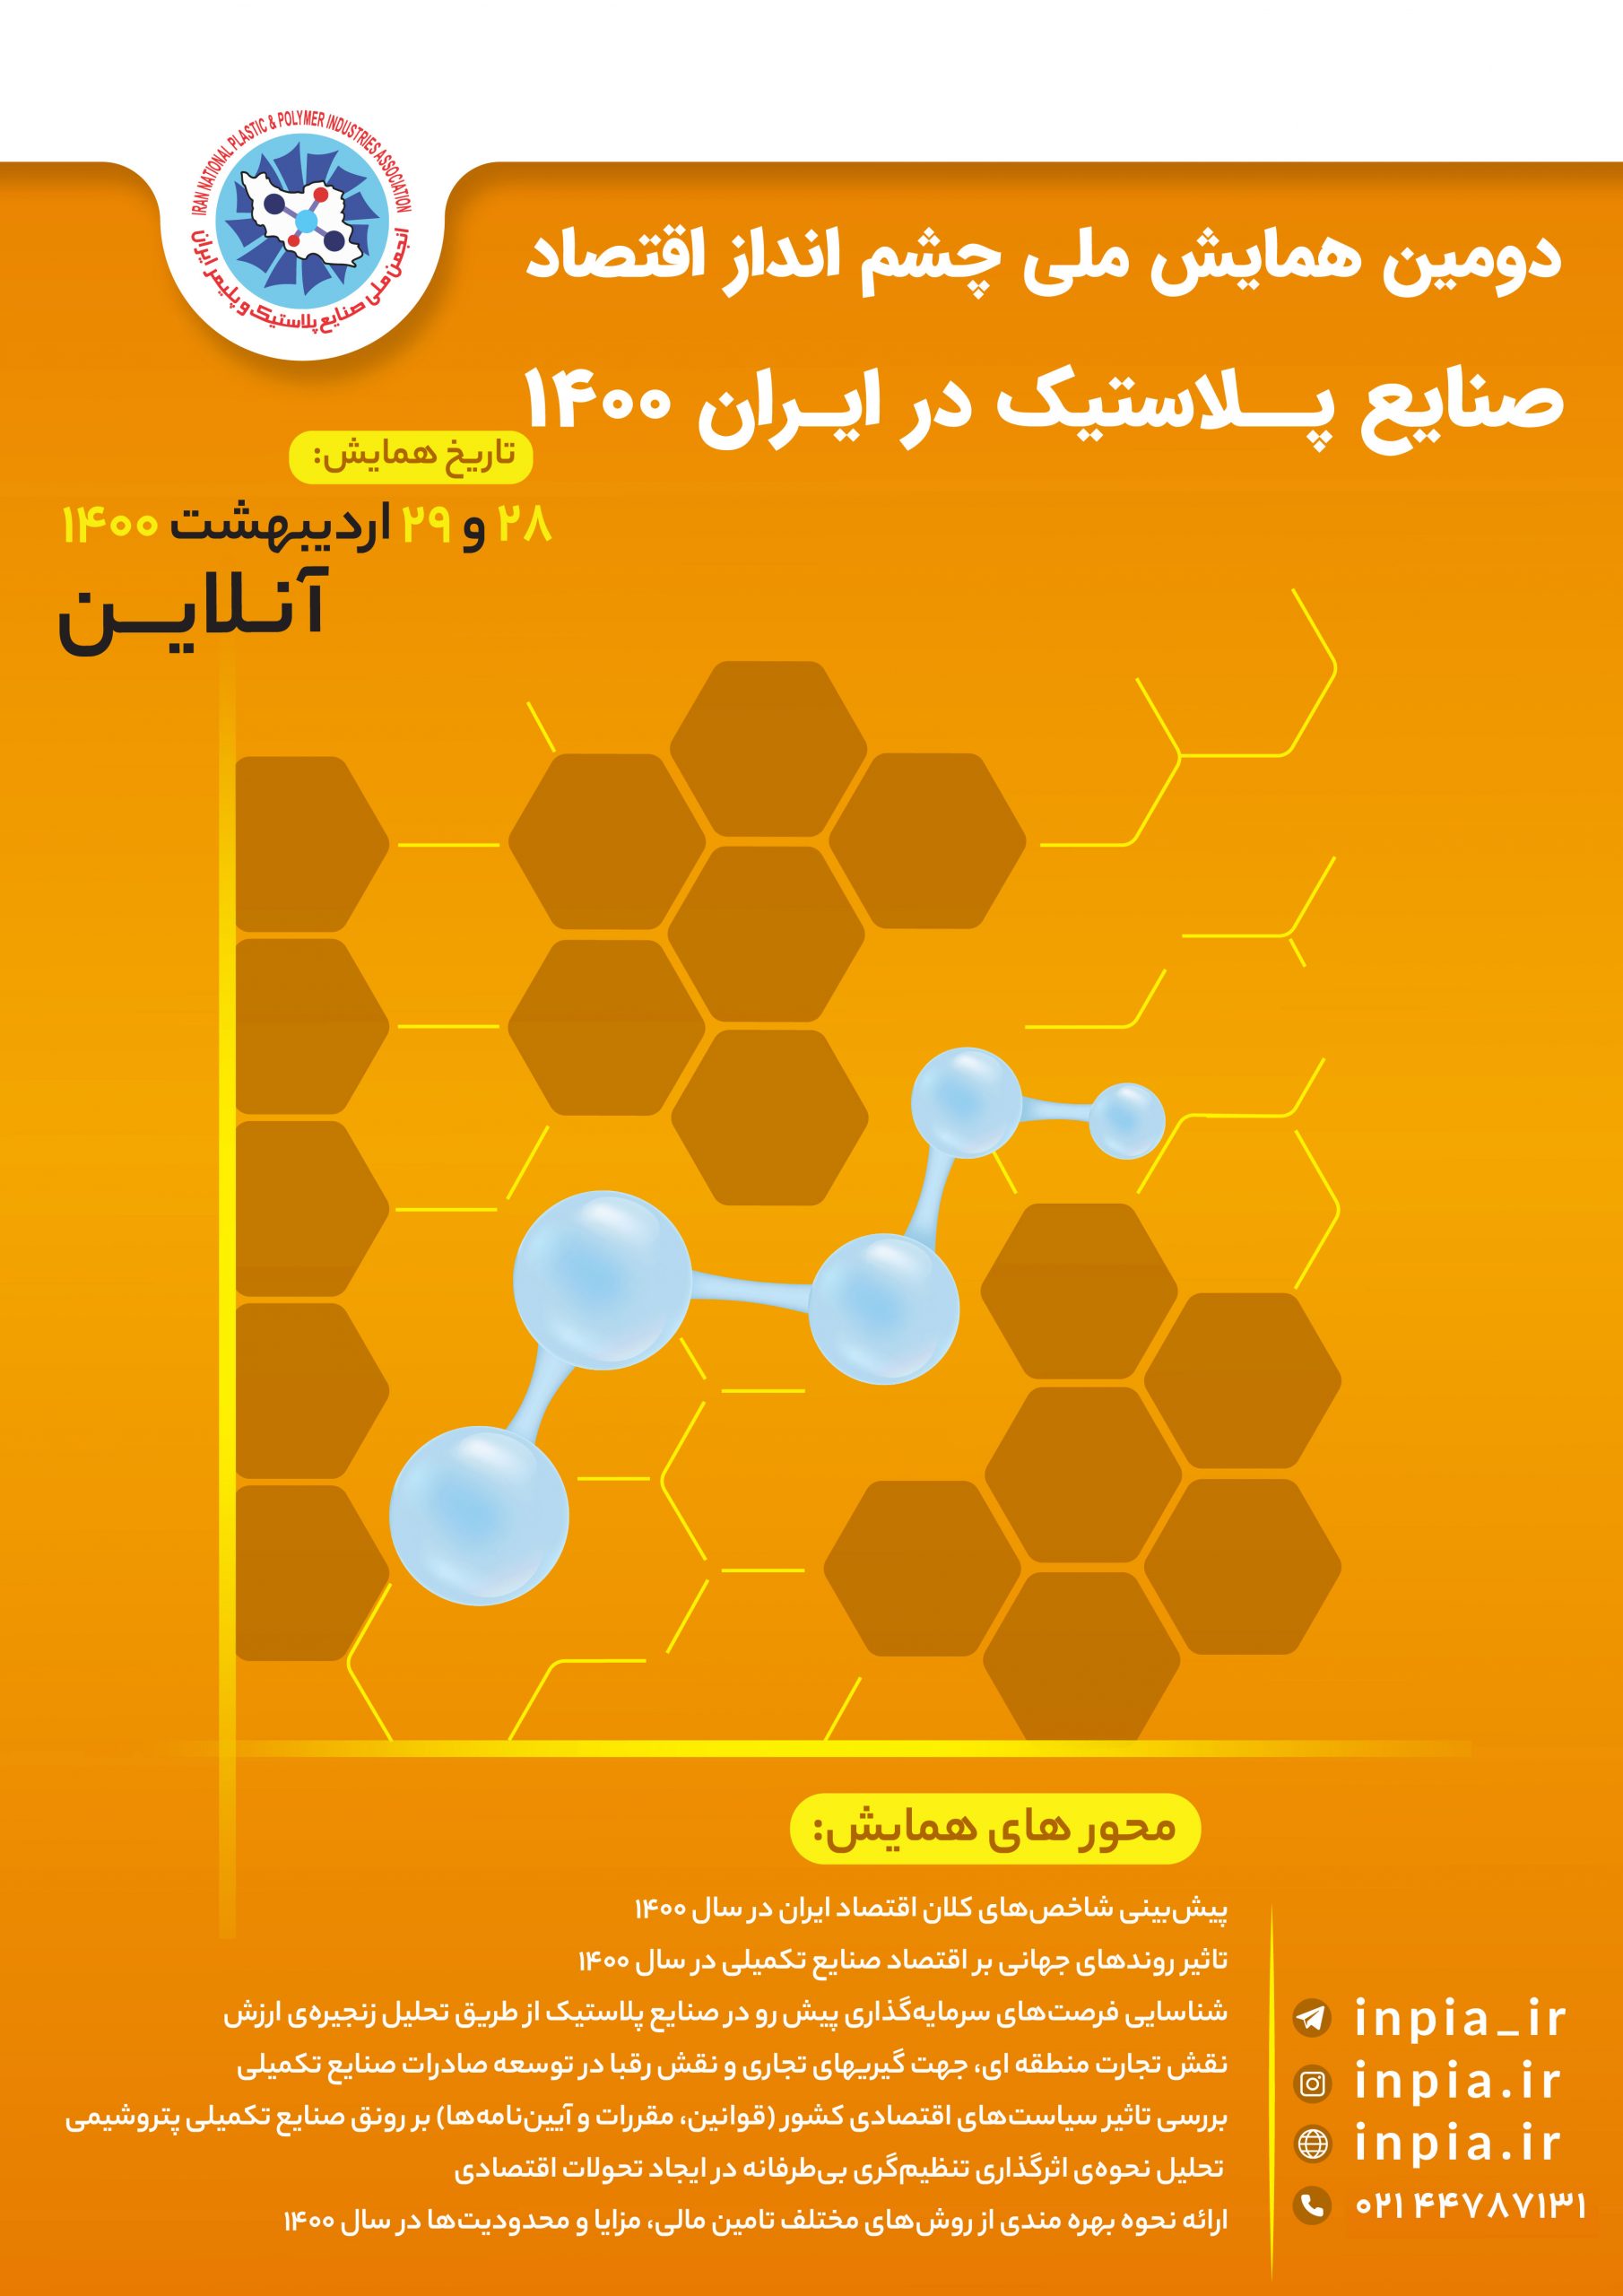 The second national conference “Economic Outlook for Plastic Industries in Iran 140” will be held by the National Association of Polymer Industries of Iran